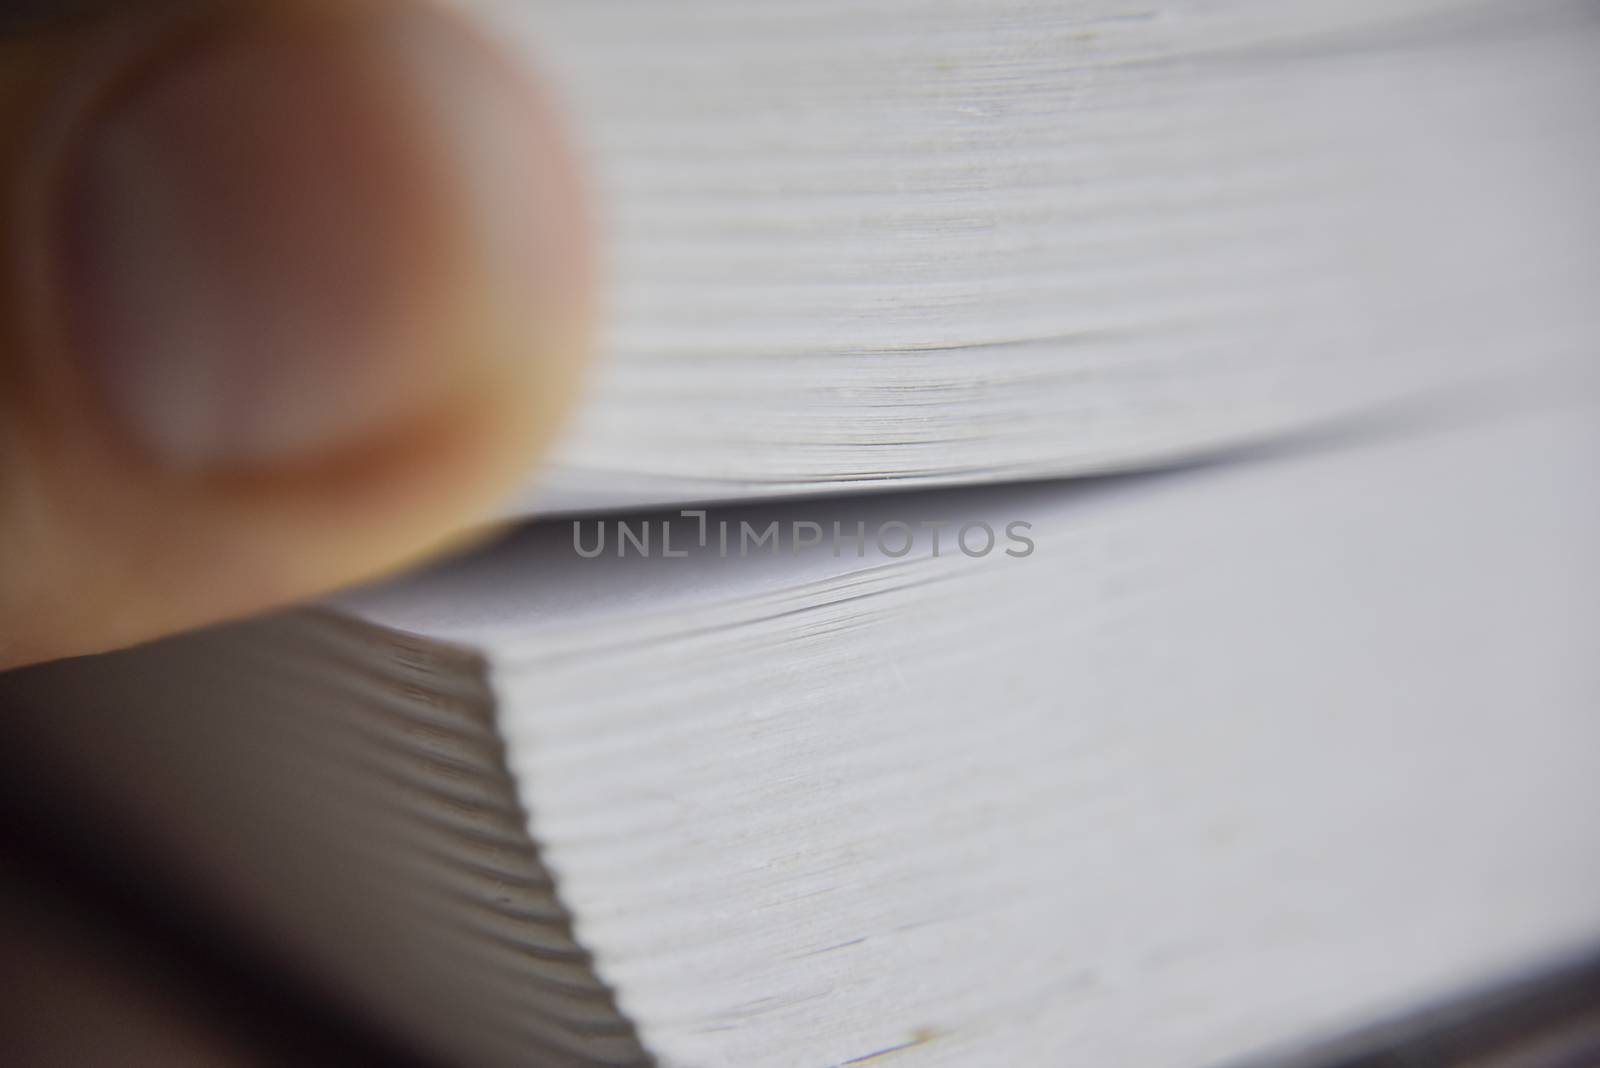 selective focus, macro look at the pages of the thick book, knowledge concept